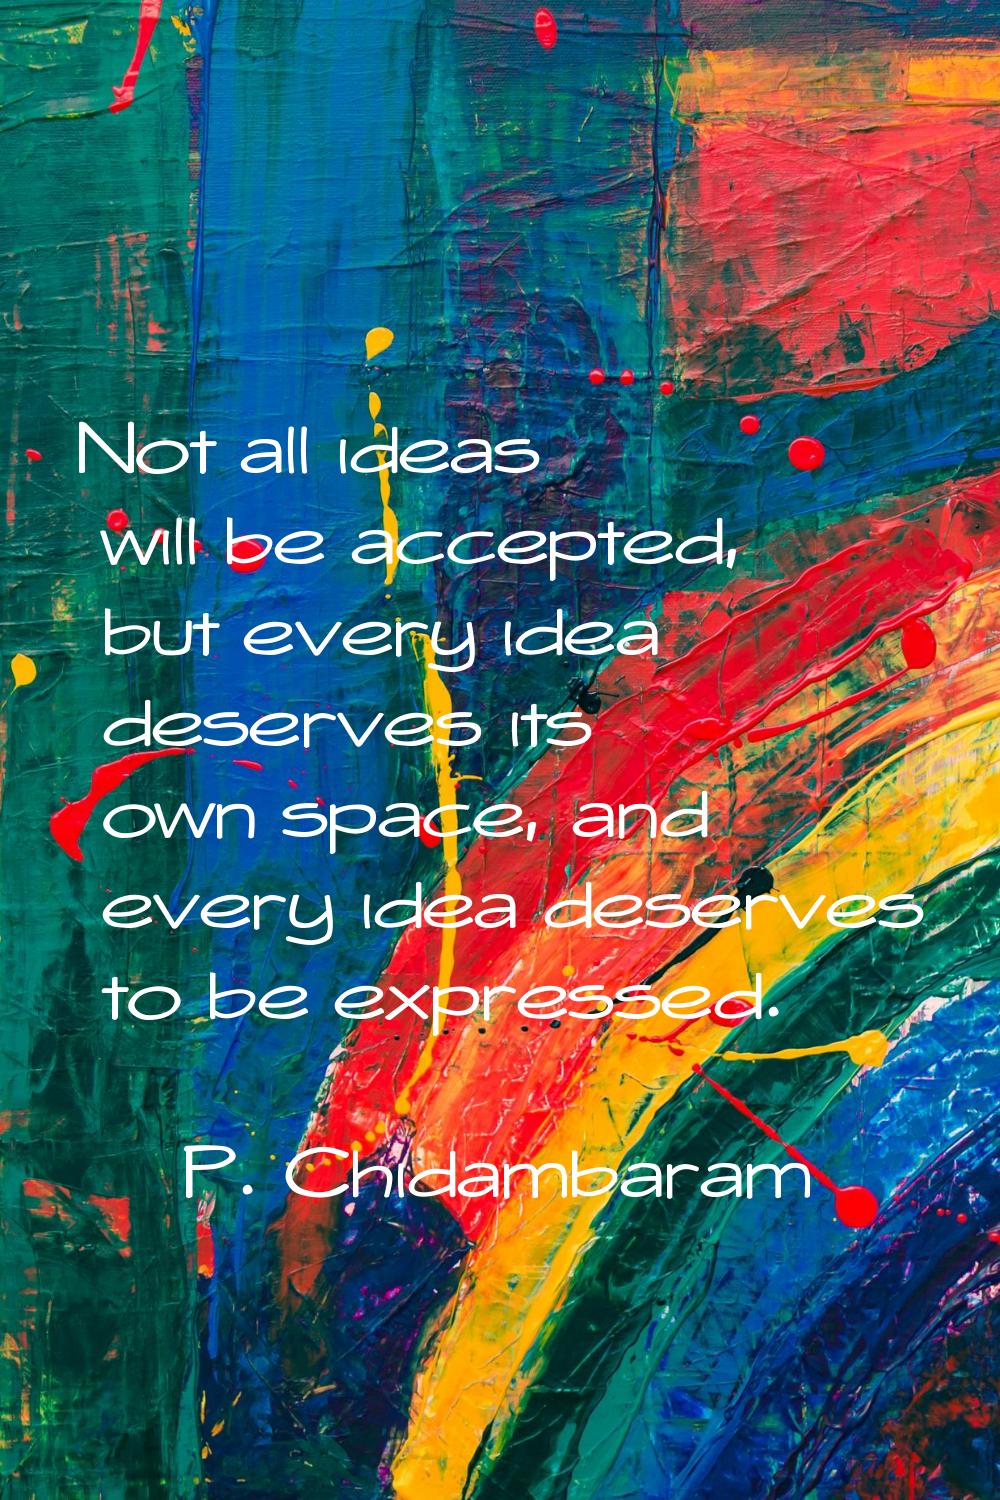 Not all ideas will be accepted, but every idea deserves its own space, and every idea deserves to b